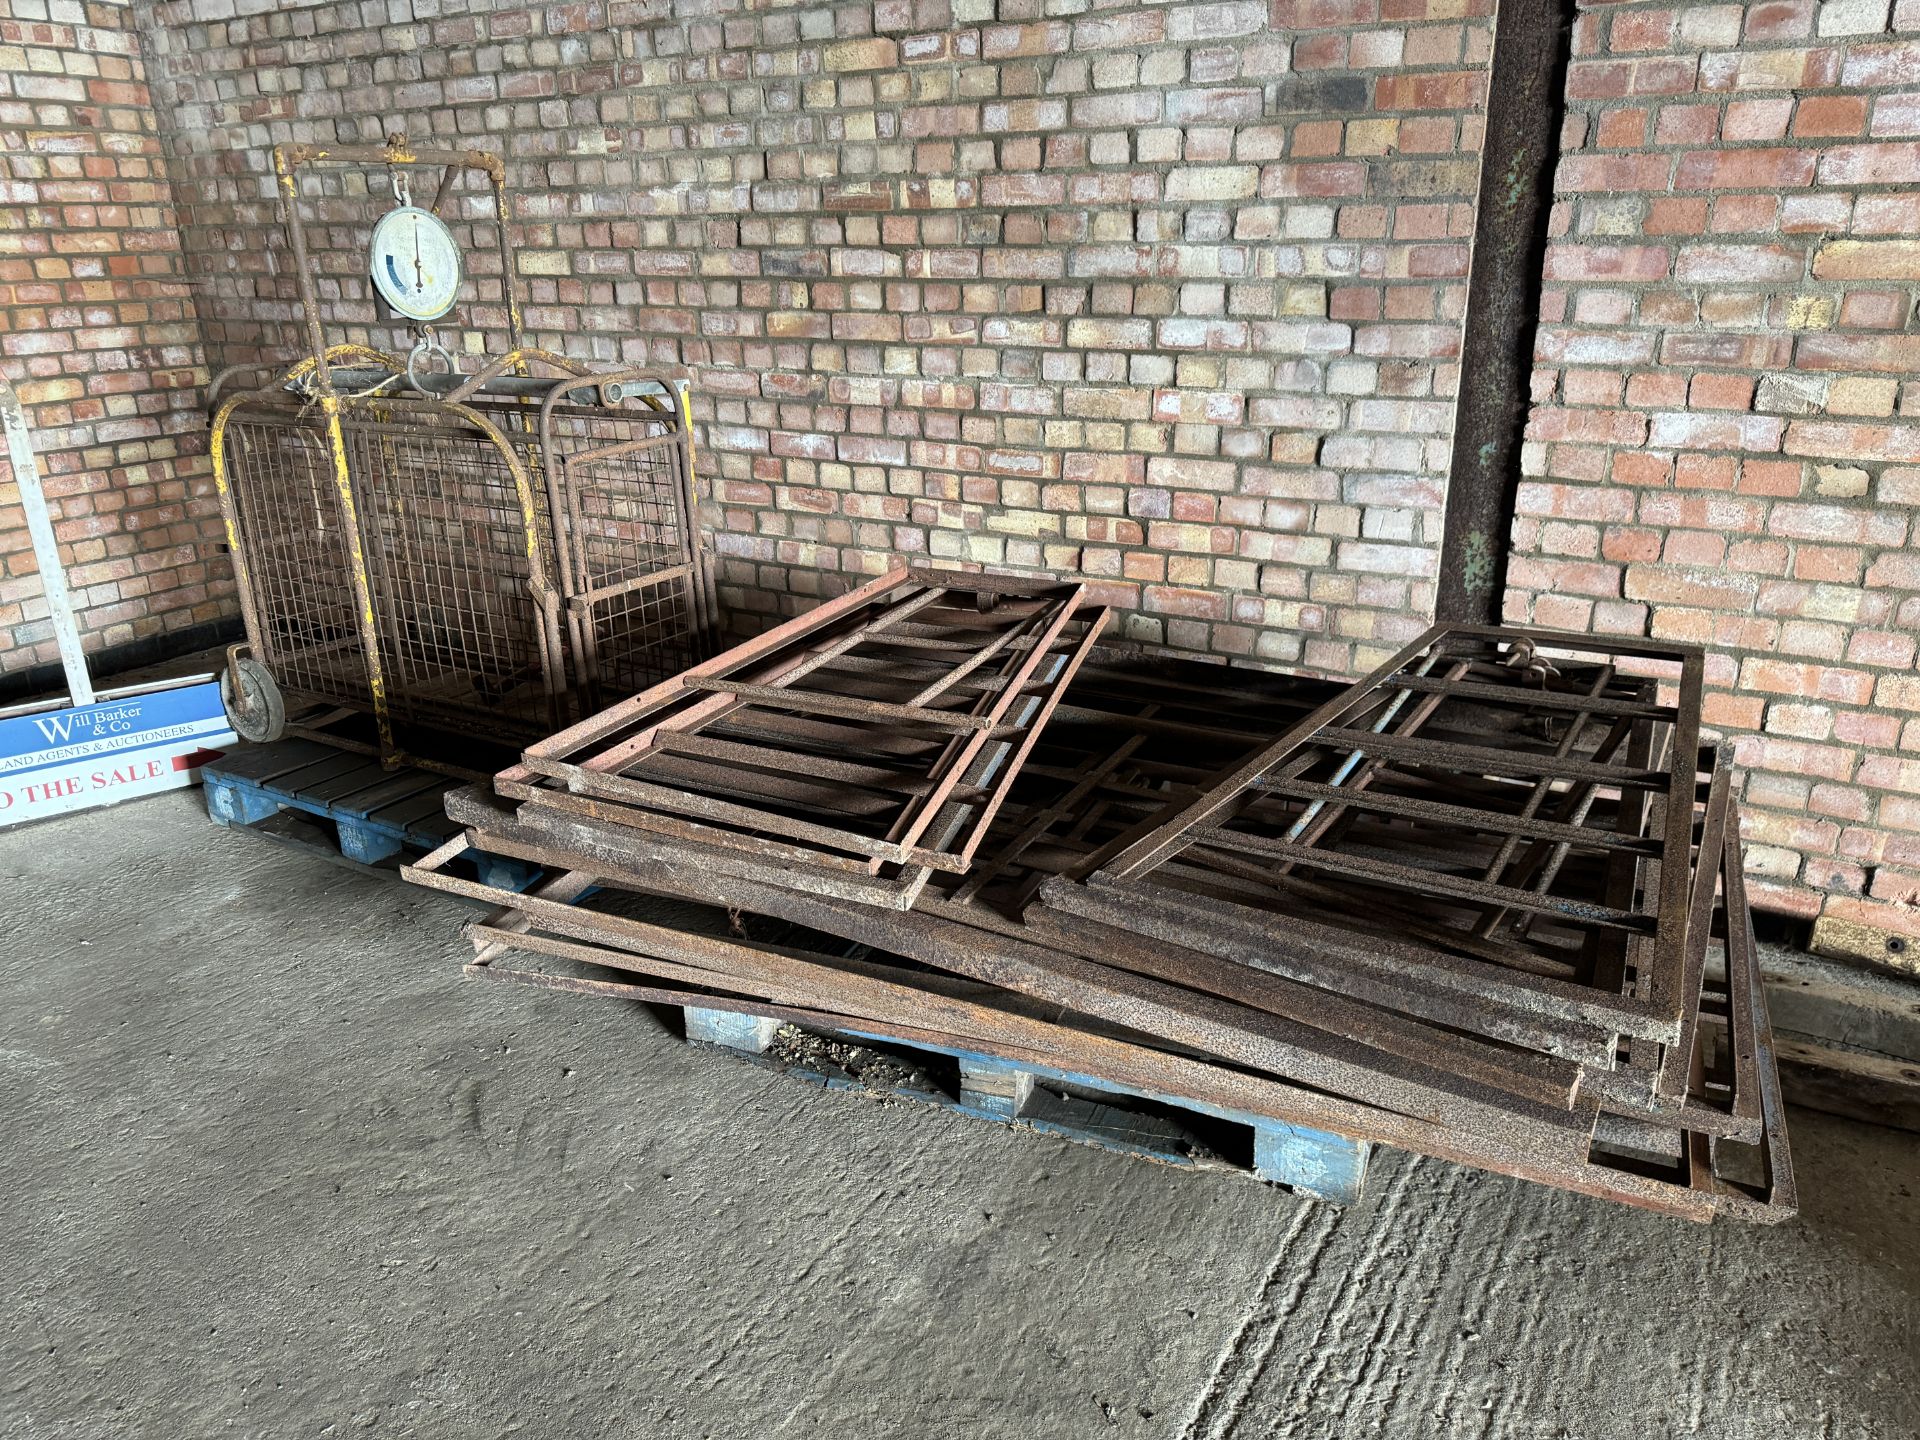 Pig weigher + farrowing crates